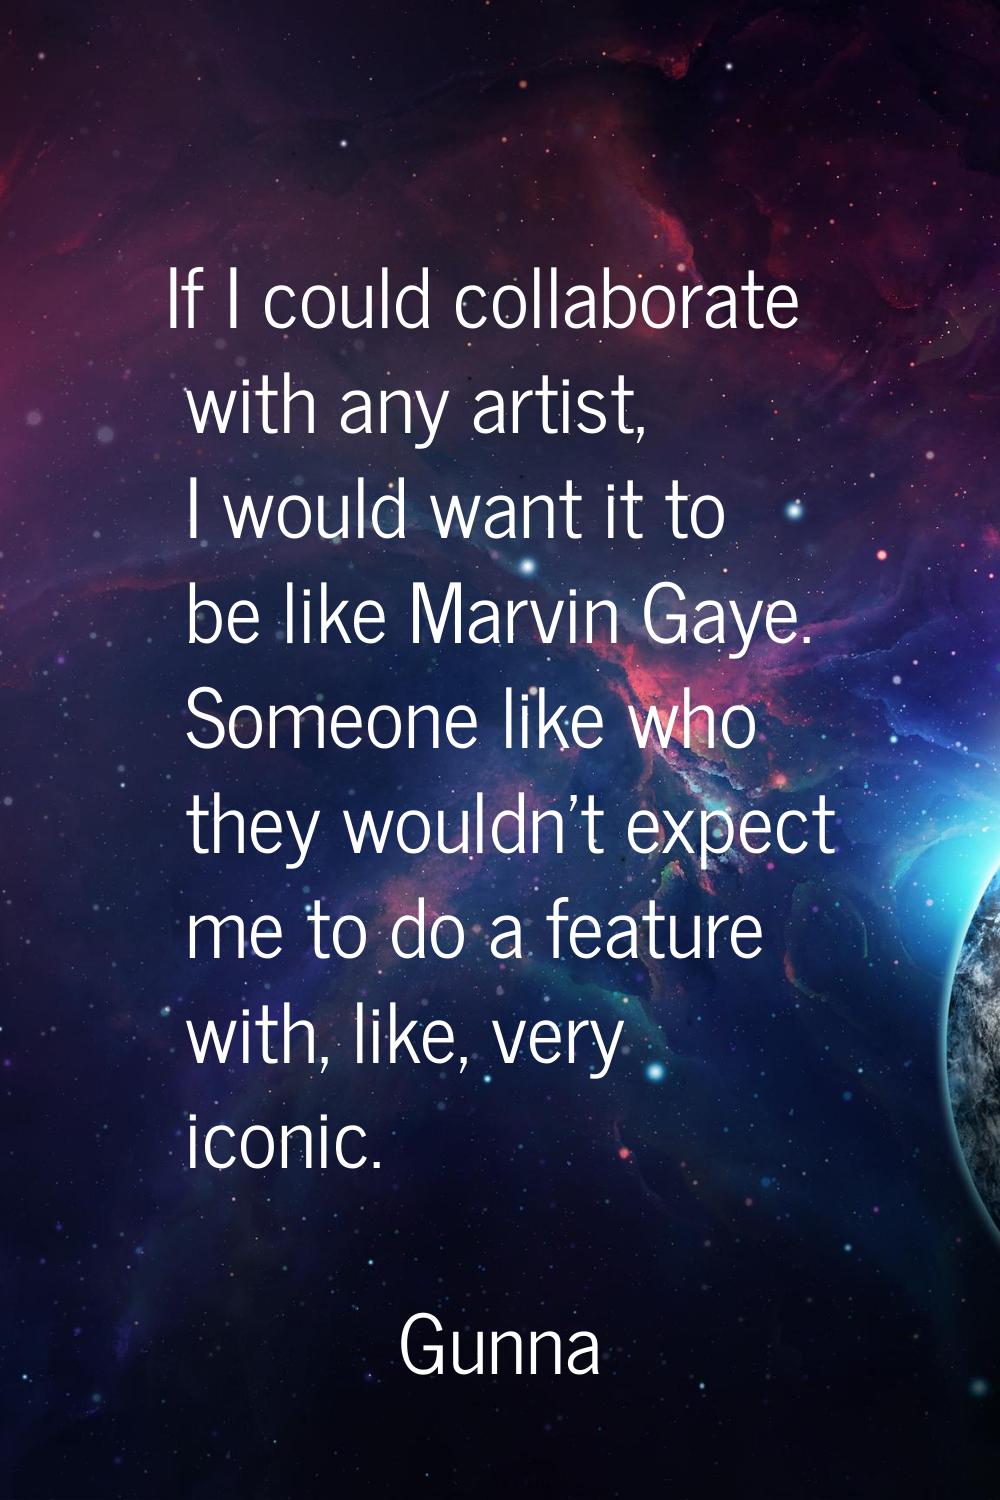 If I could collaborate with any artist, I would want it to be like Marvin Gaye. Someone like who th